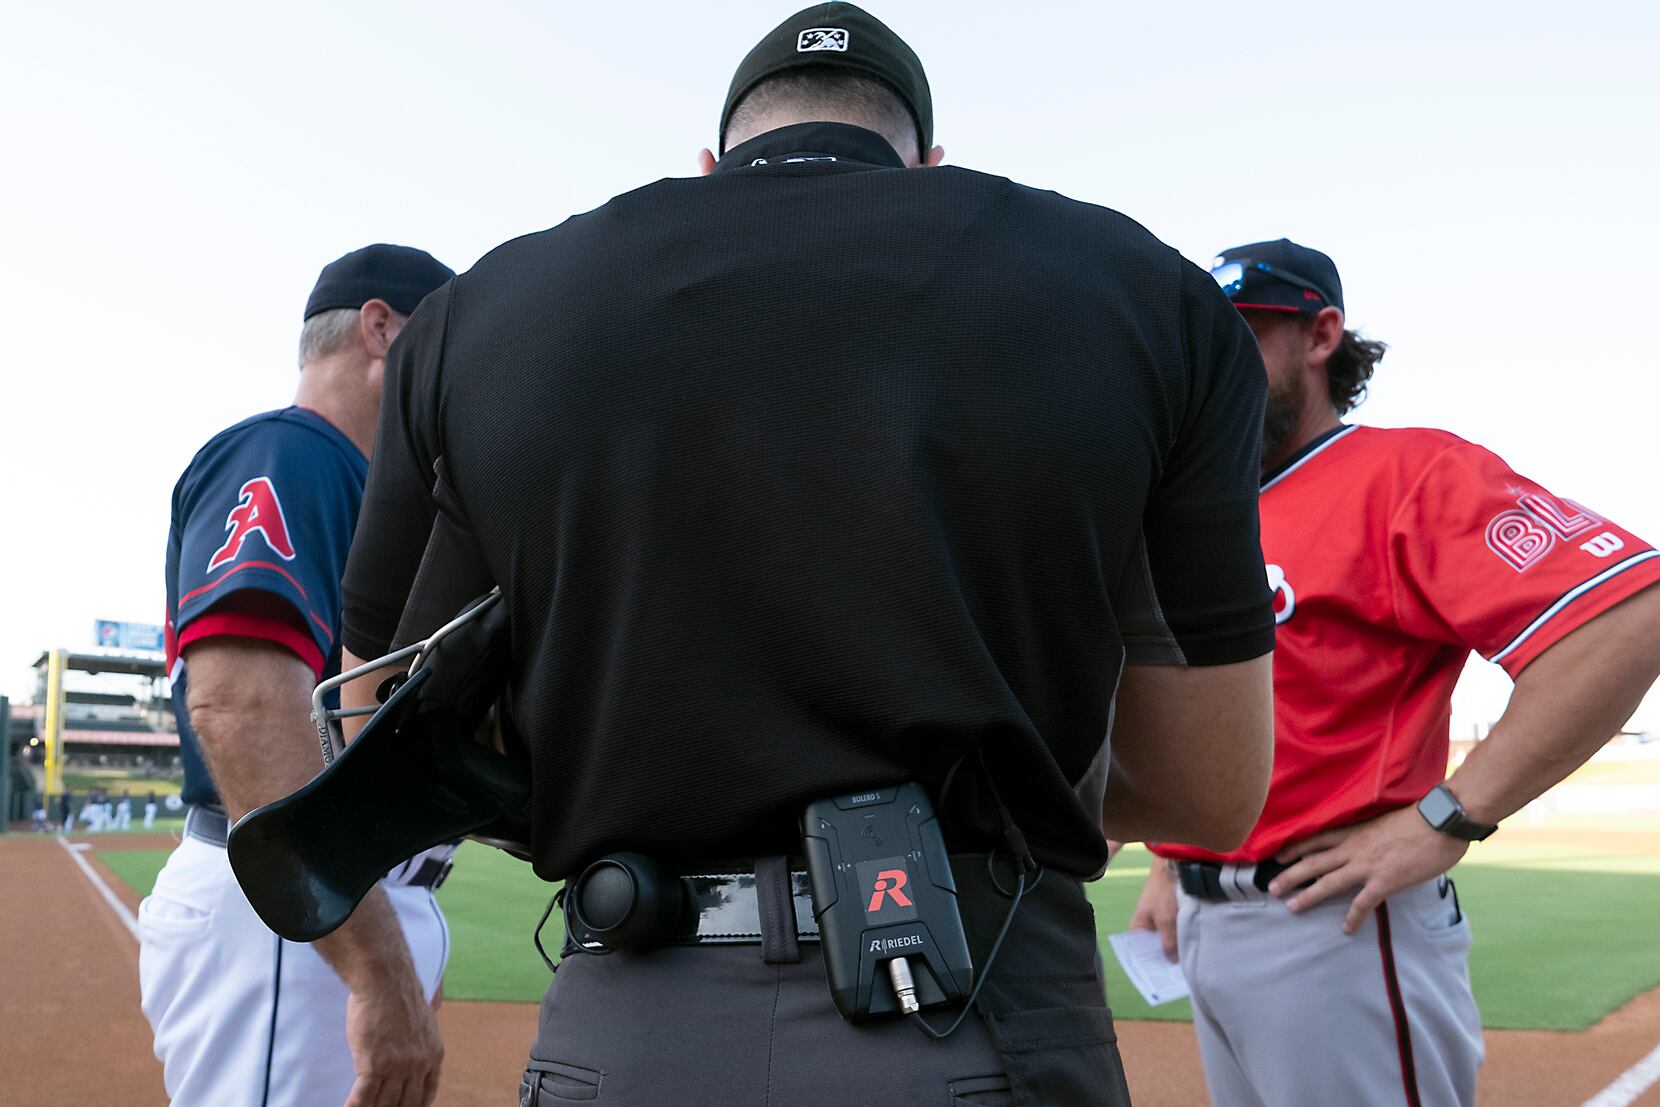 Robot umpires to be used during Red Wings games this season